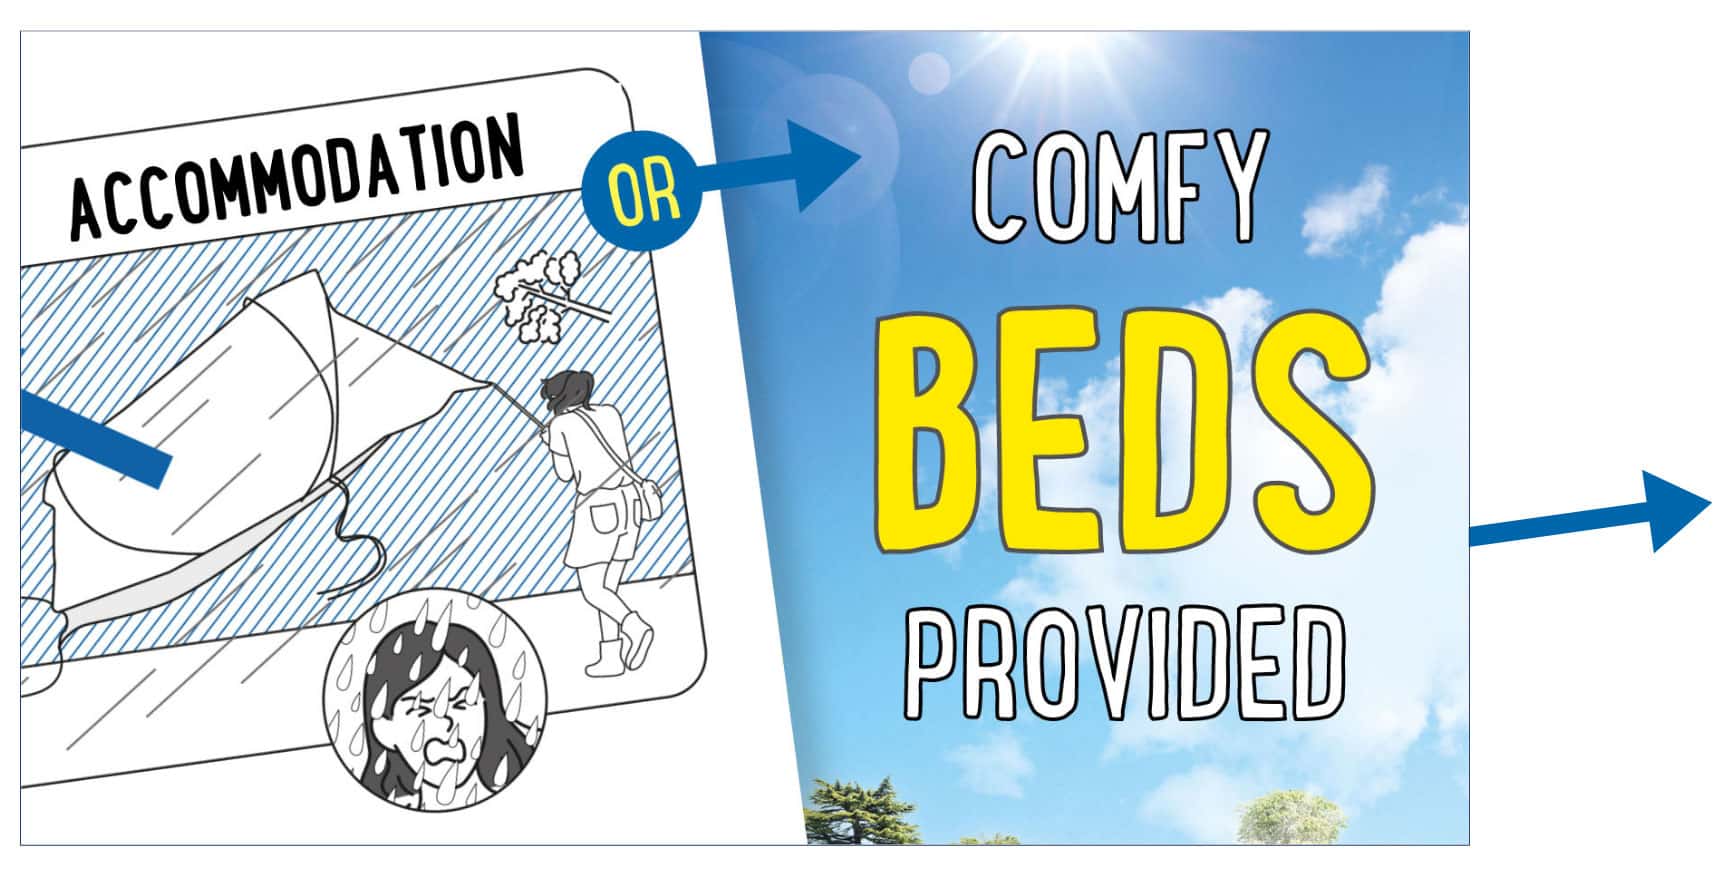 Group accommodation banner with comfy beds provided.